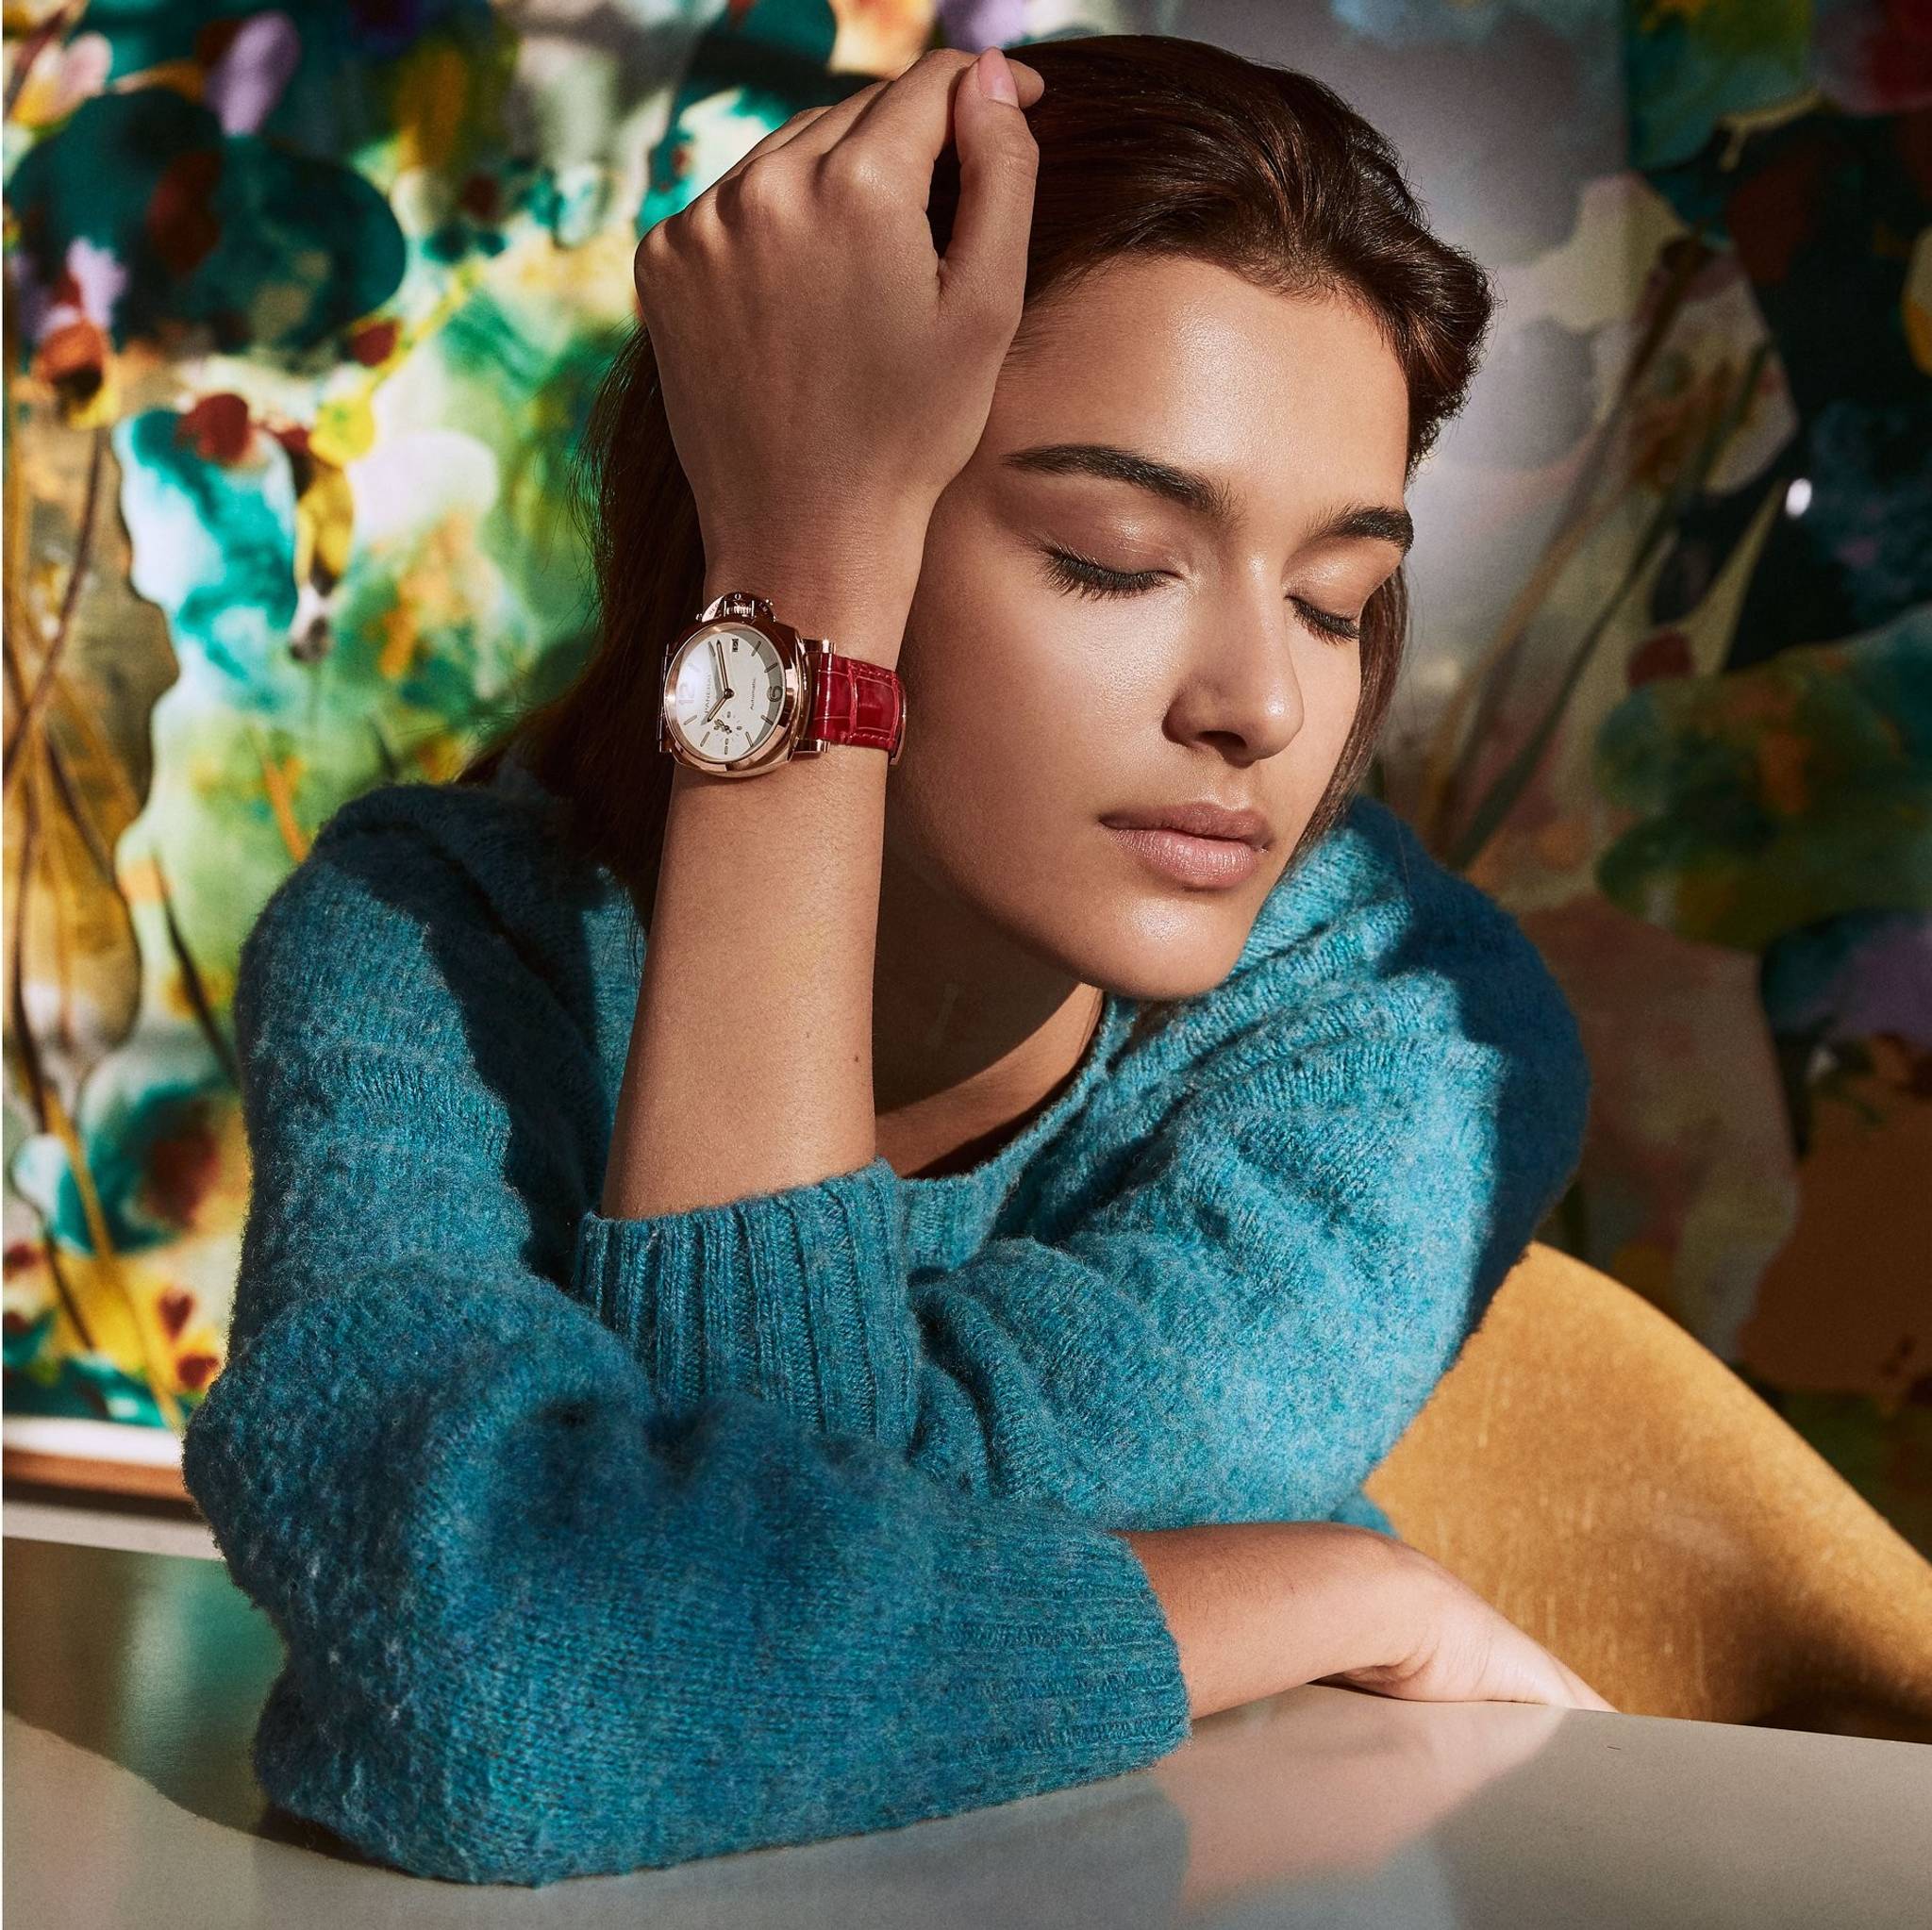 How are women changing the luxury watch market?